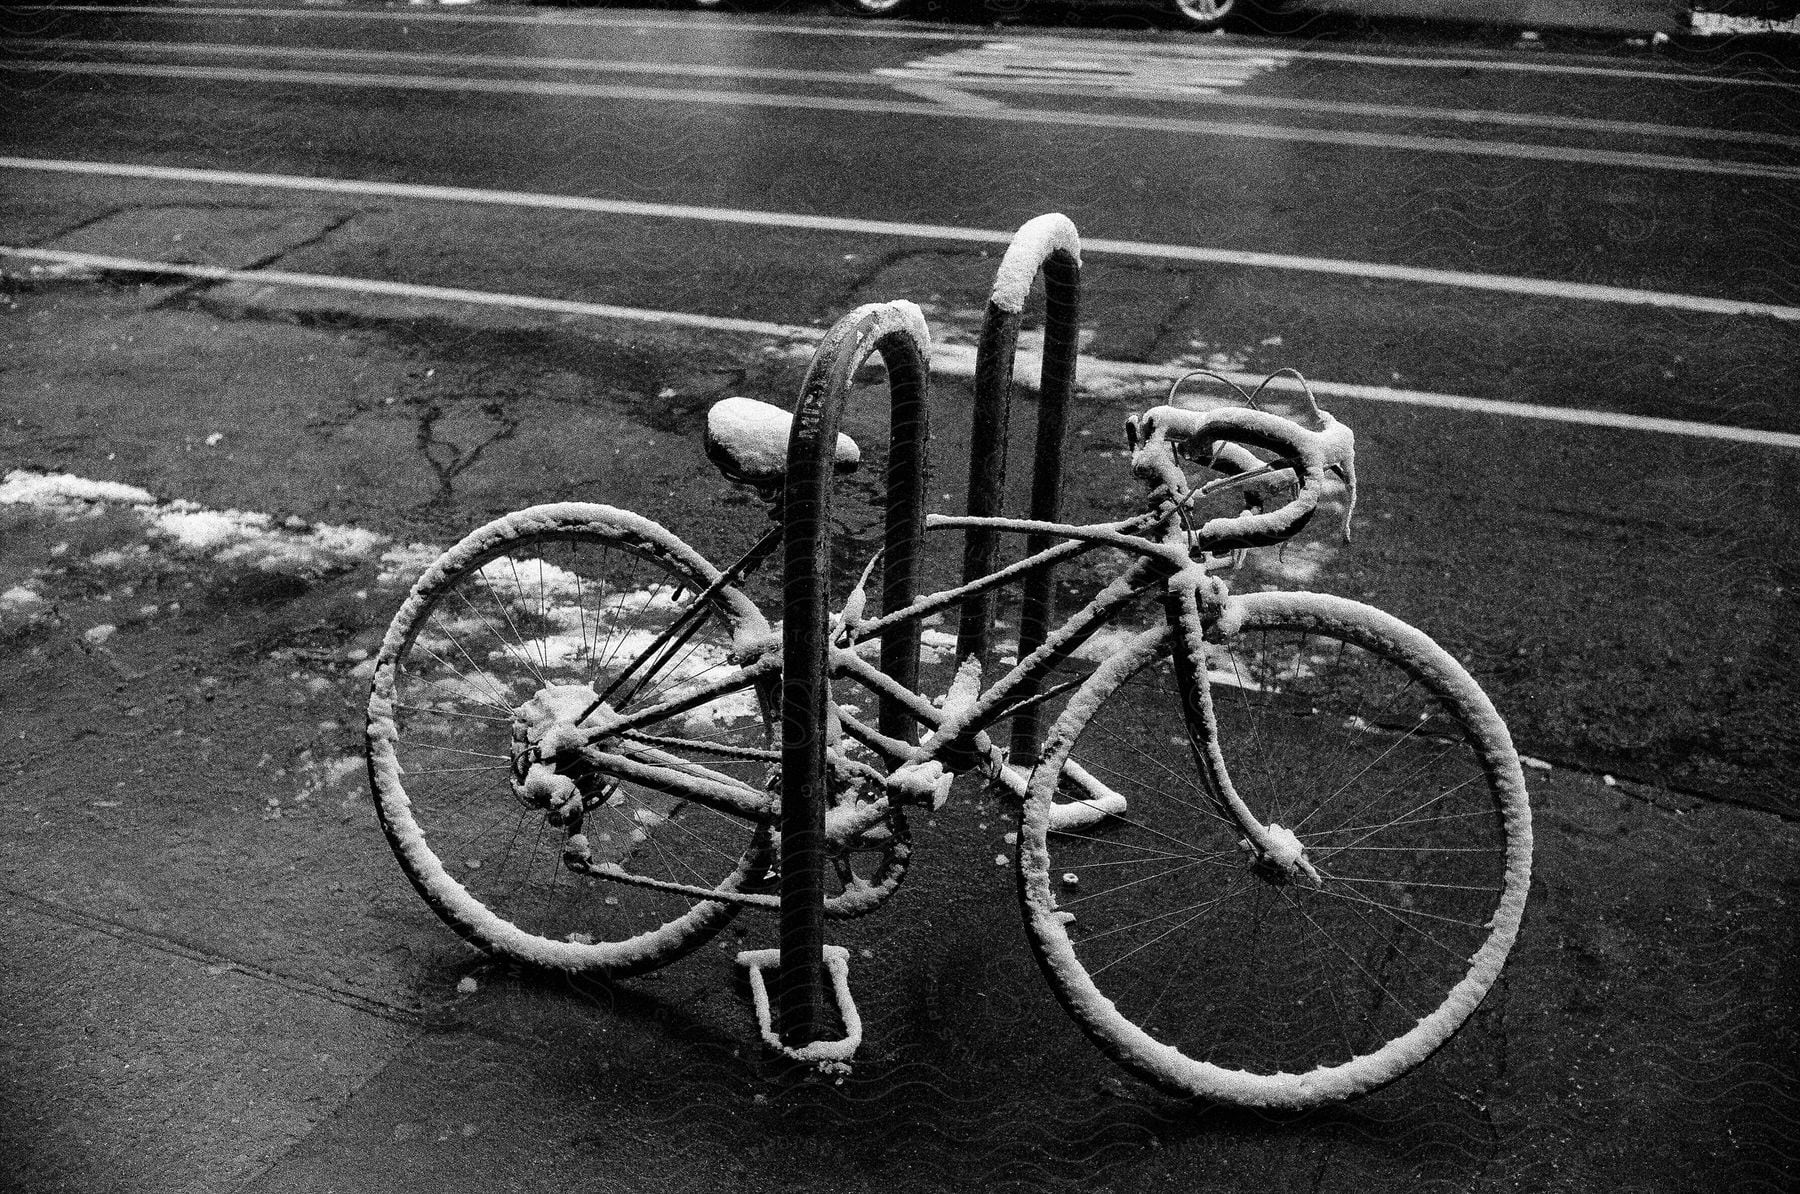 A bicycle covered in ice and snow parked on a downtown curb